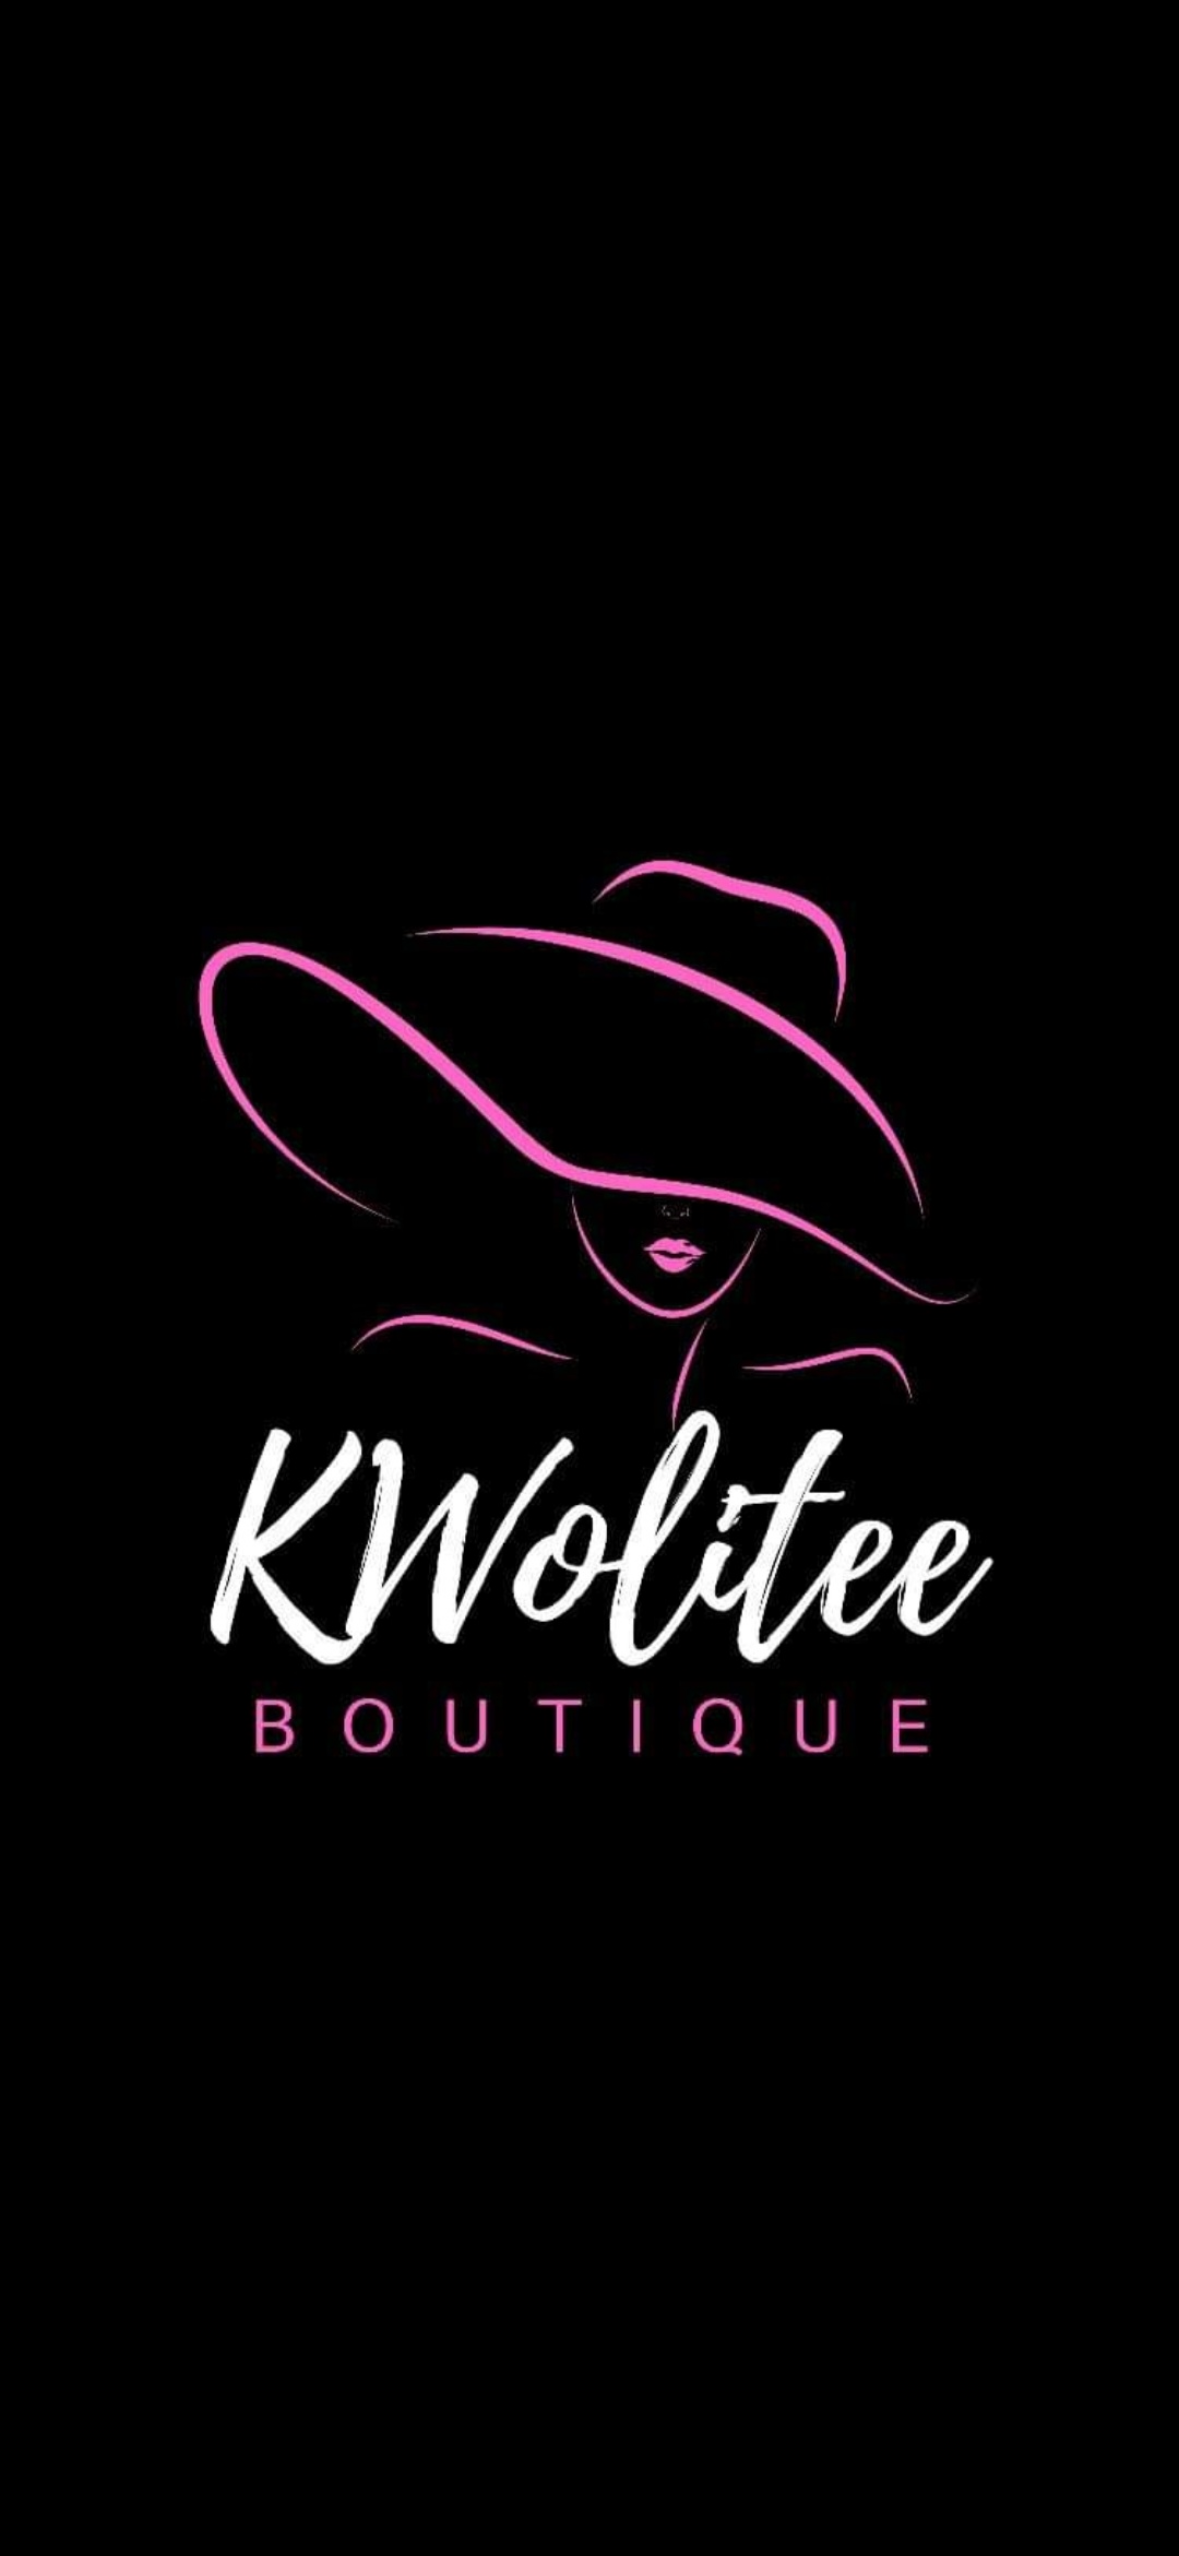 Kwolitee Boutique $10 Gift Card